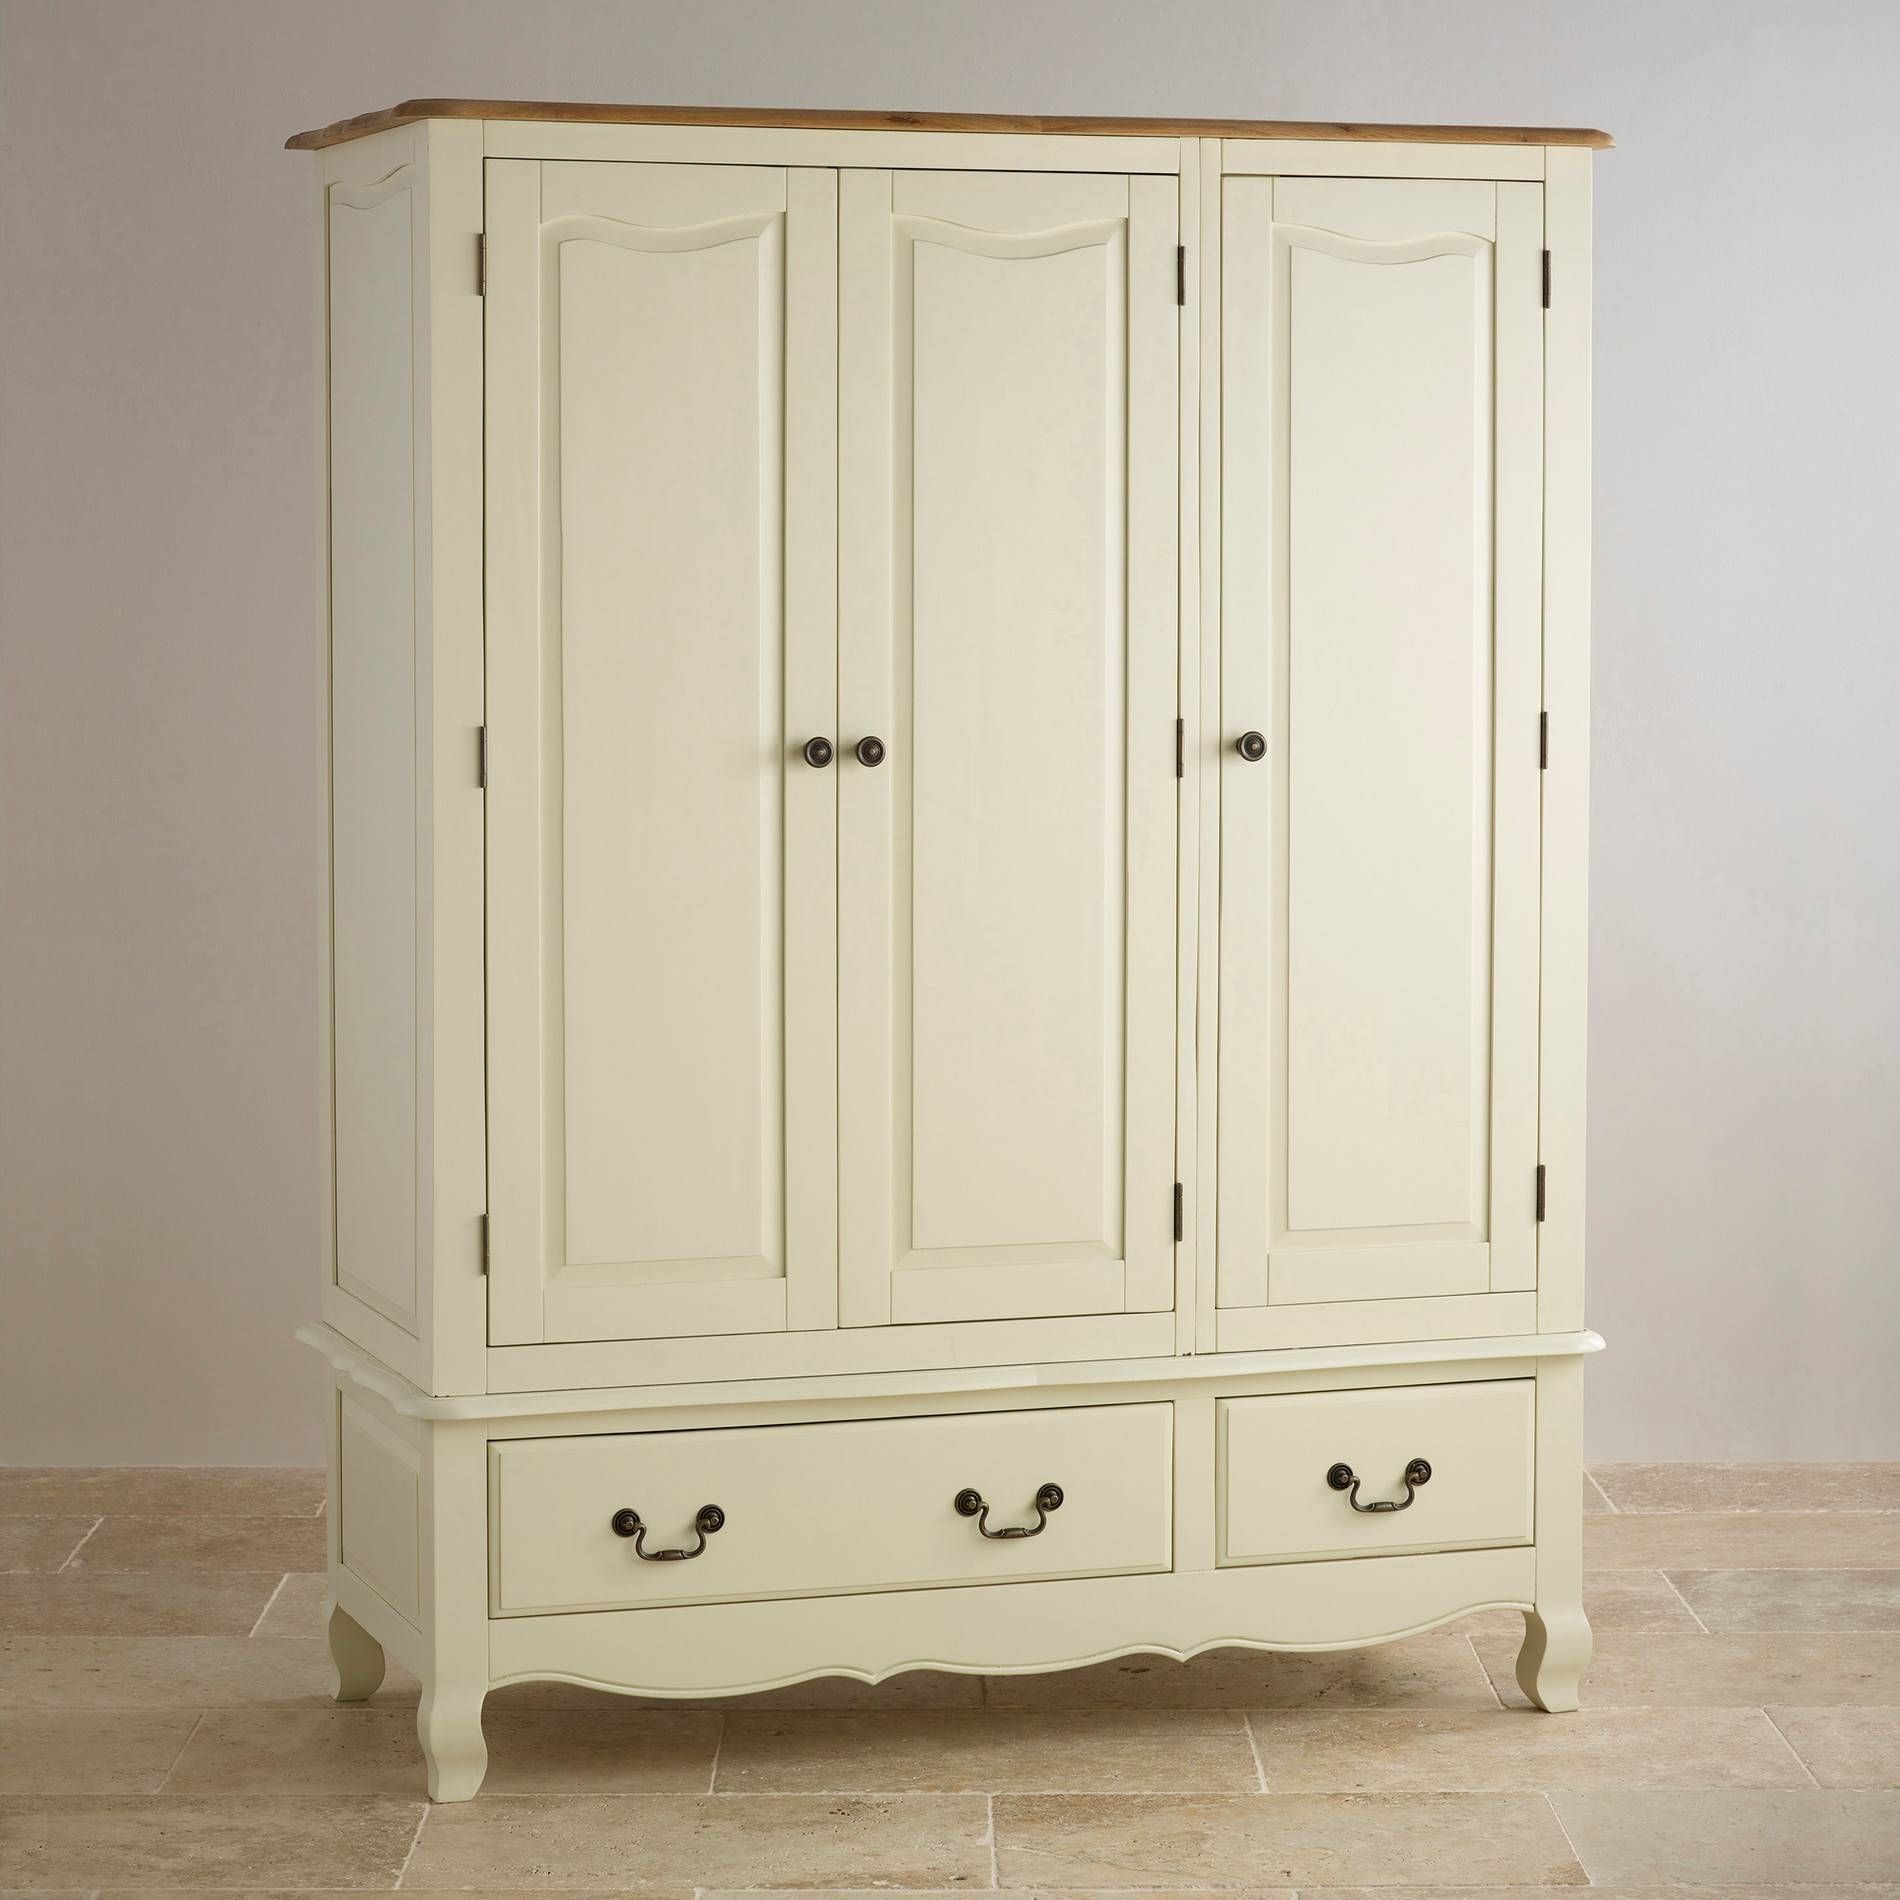 The Bella Painted Range | Oak Furniture Land In Cream French Wardrobes (View 7 of 15)